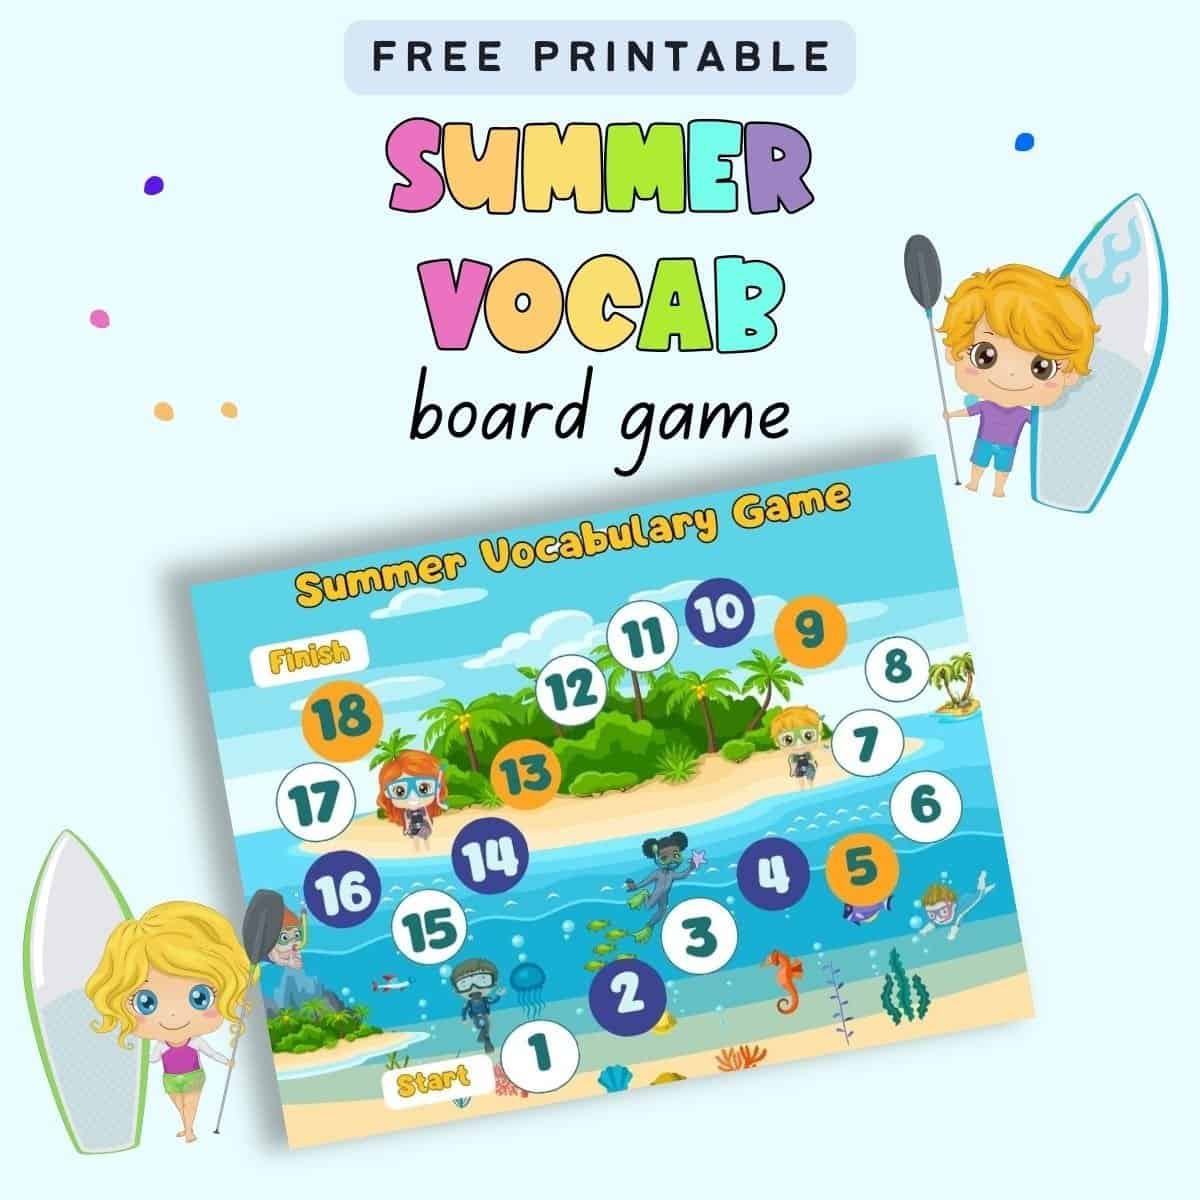 Text "free printable summer vocab board game" with a preview of a summer vocabulary board game and two children with paddleboards